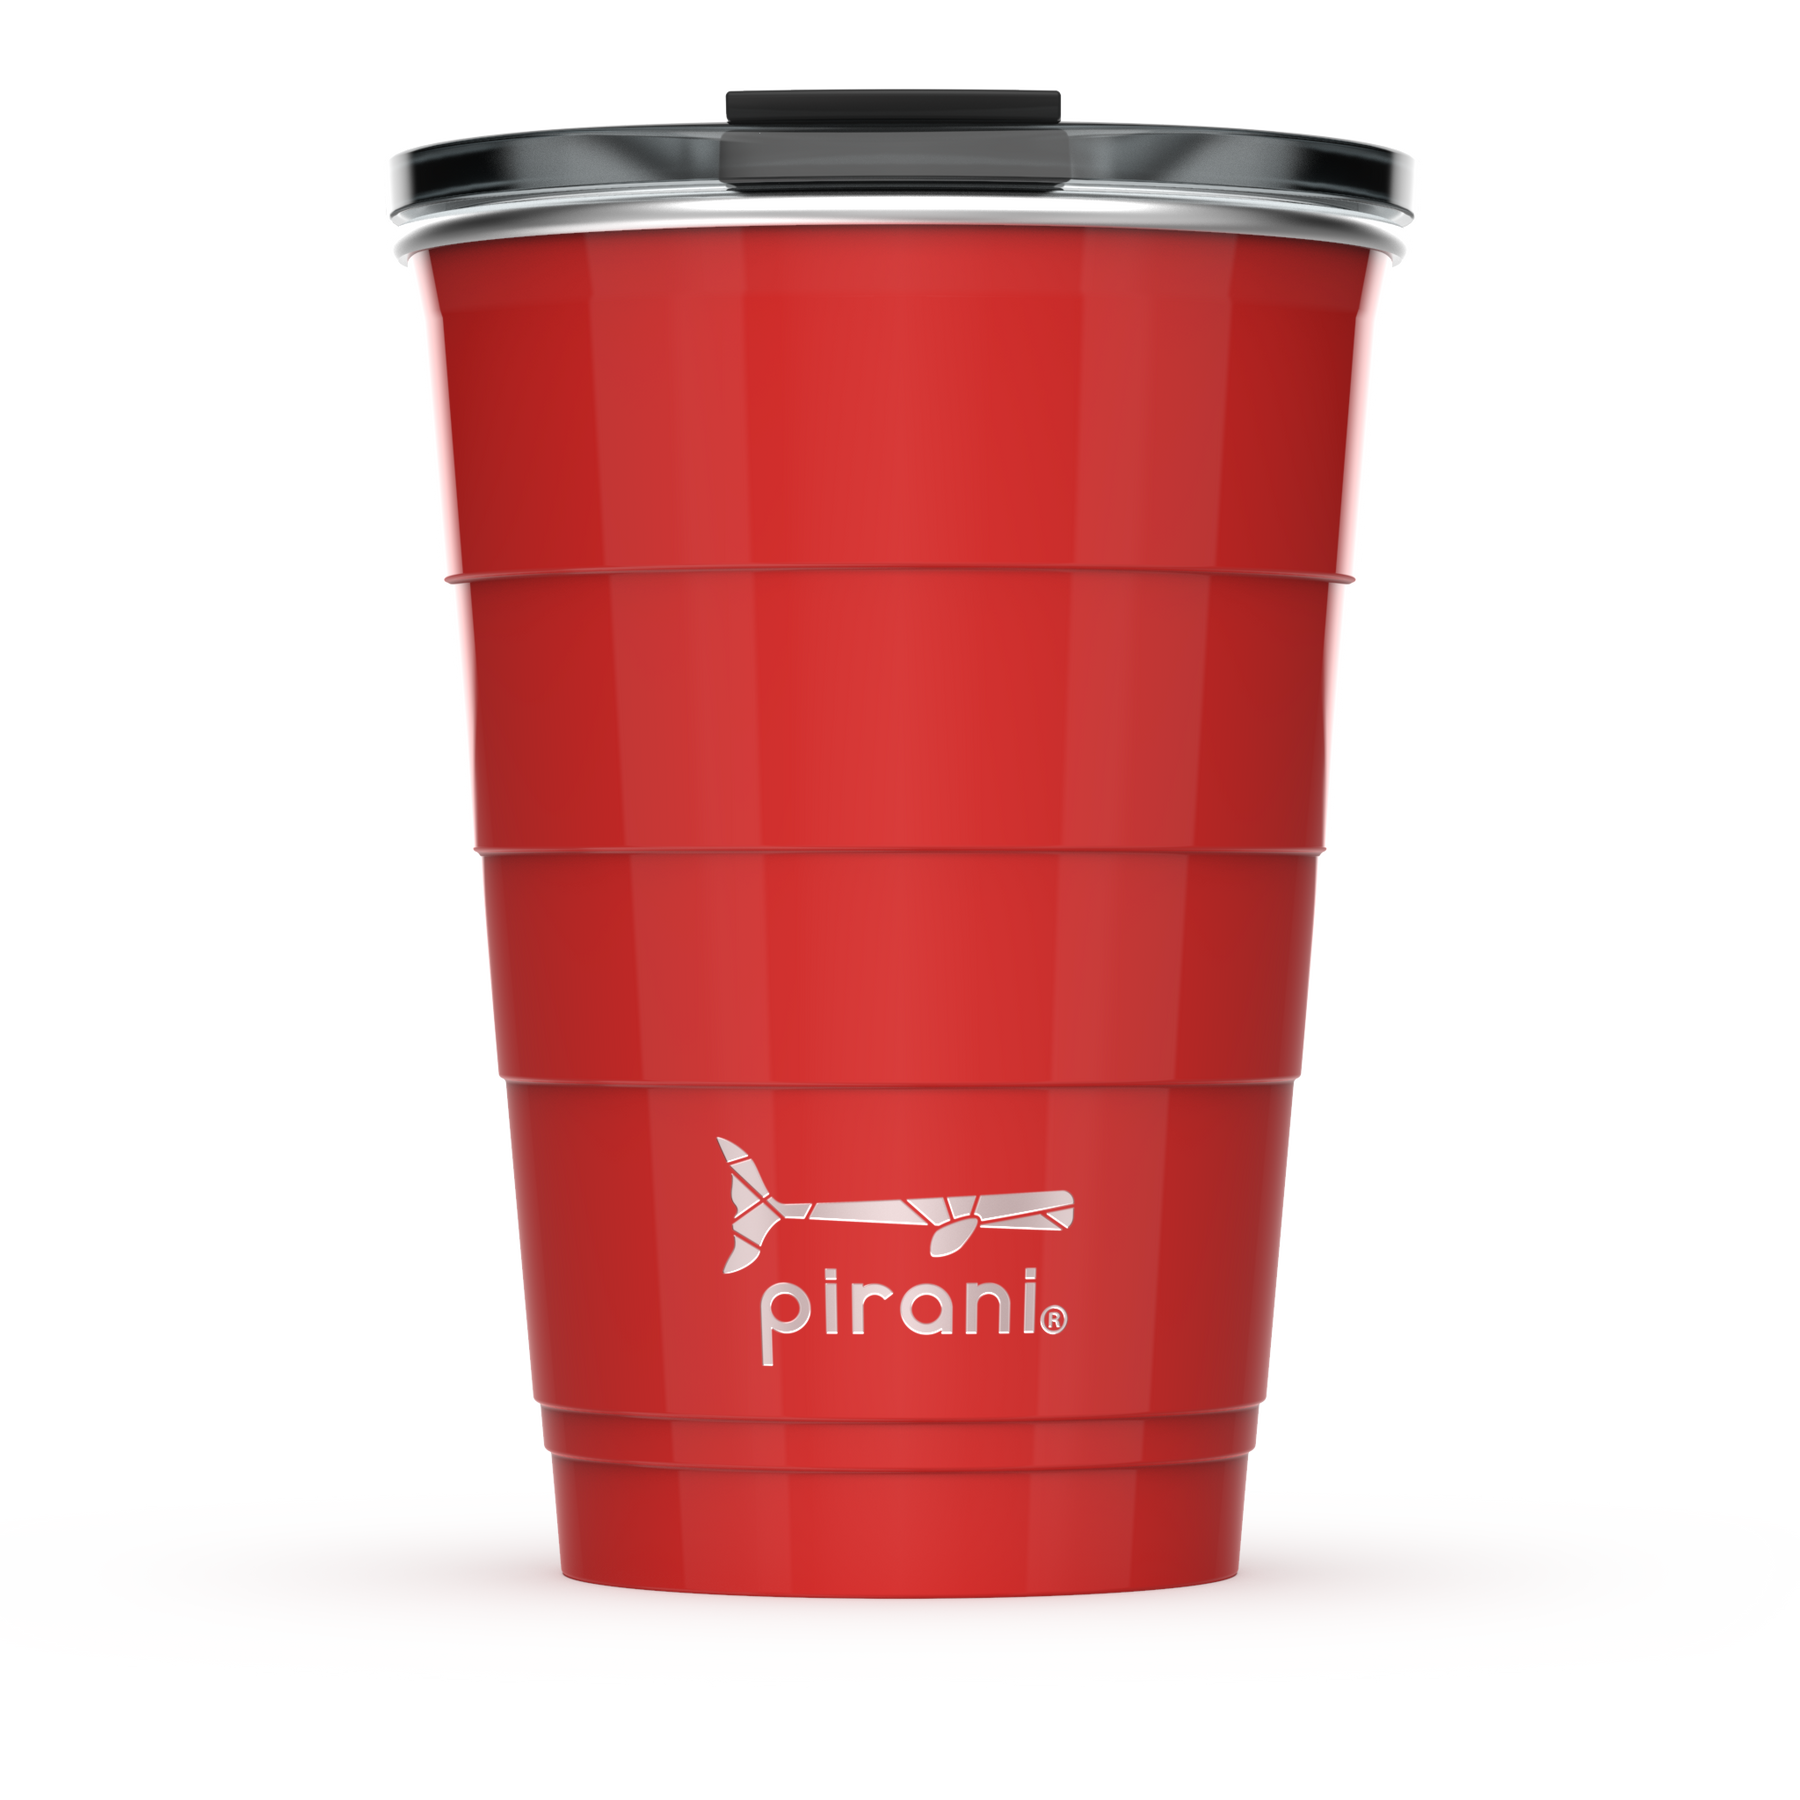 16oz Factory High Quality Reusable Red Plastic Solo Beer Cup for